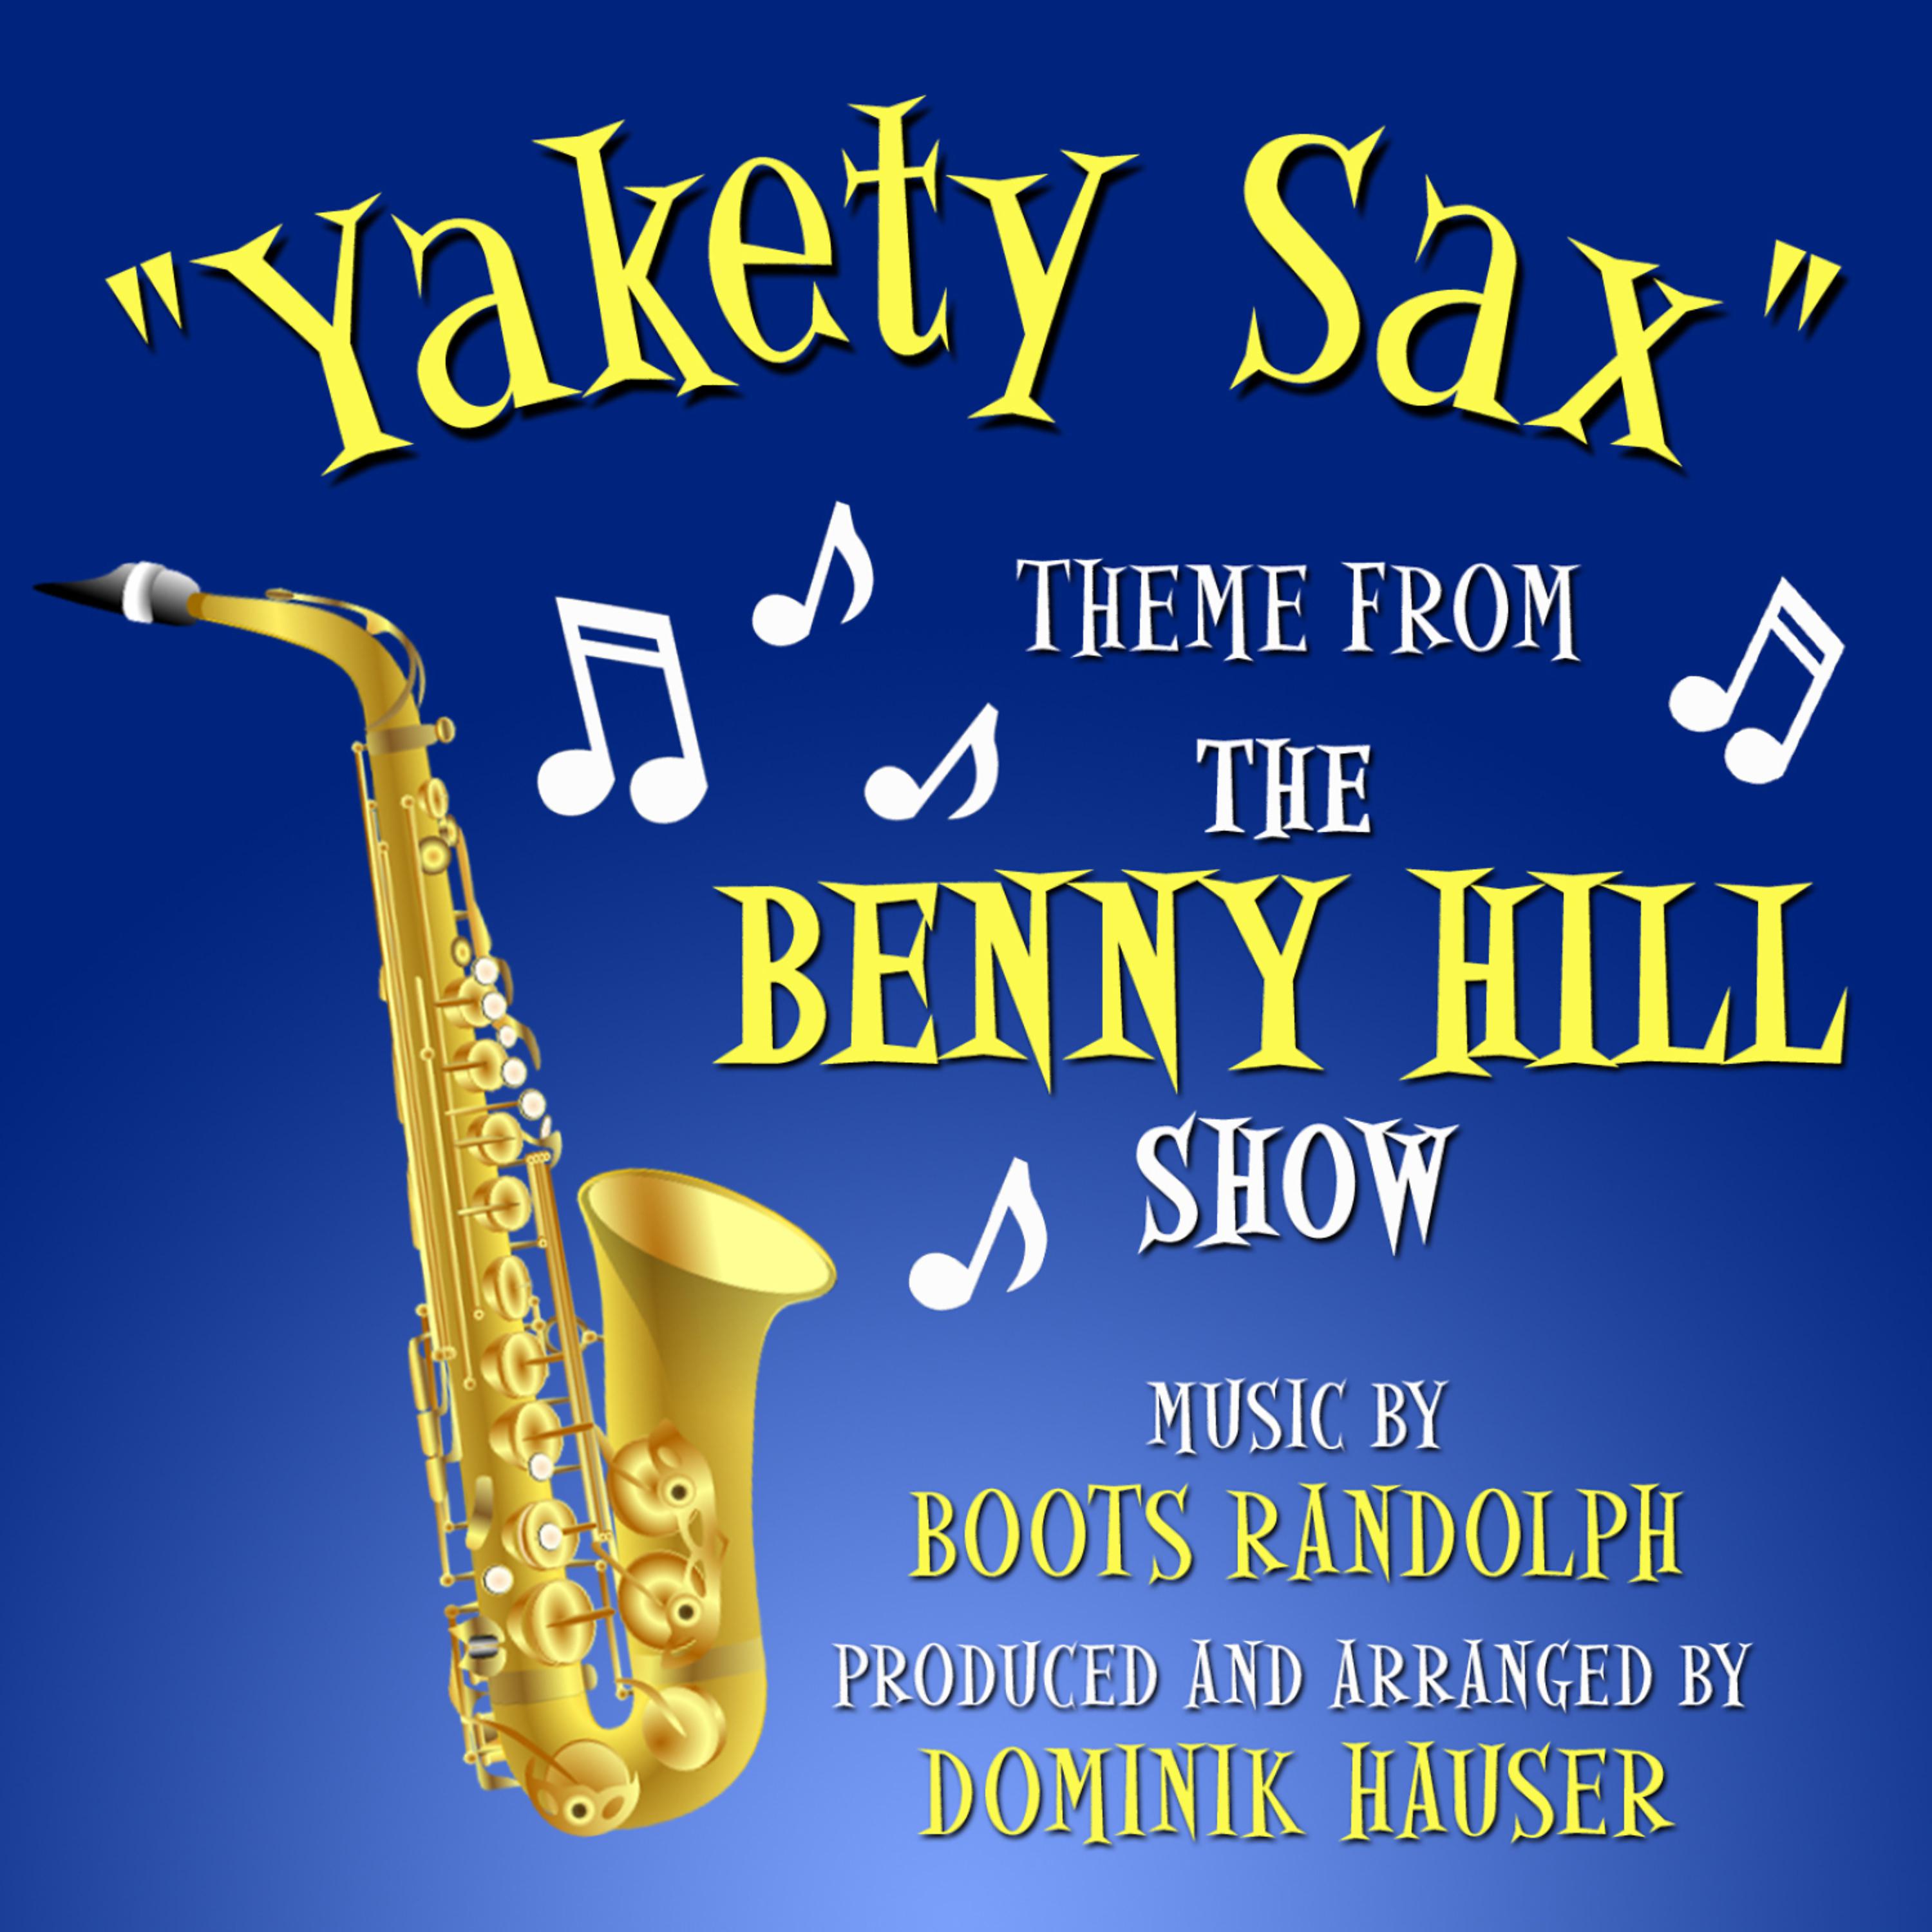 Постер альбома "Yakety Sax"- Theme from the "Benny Hill Show"